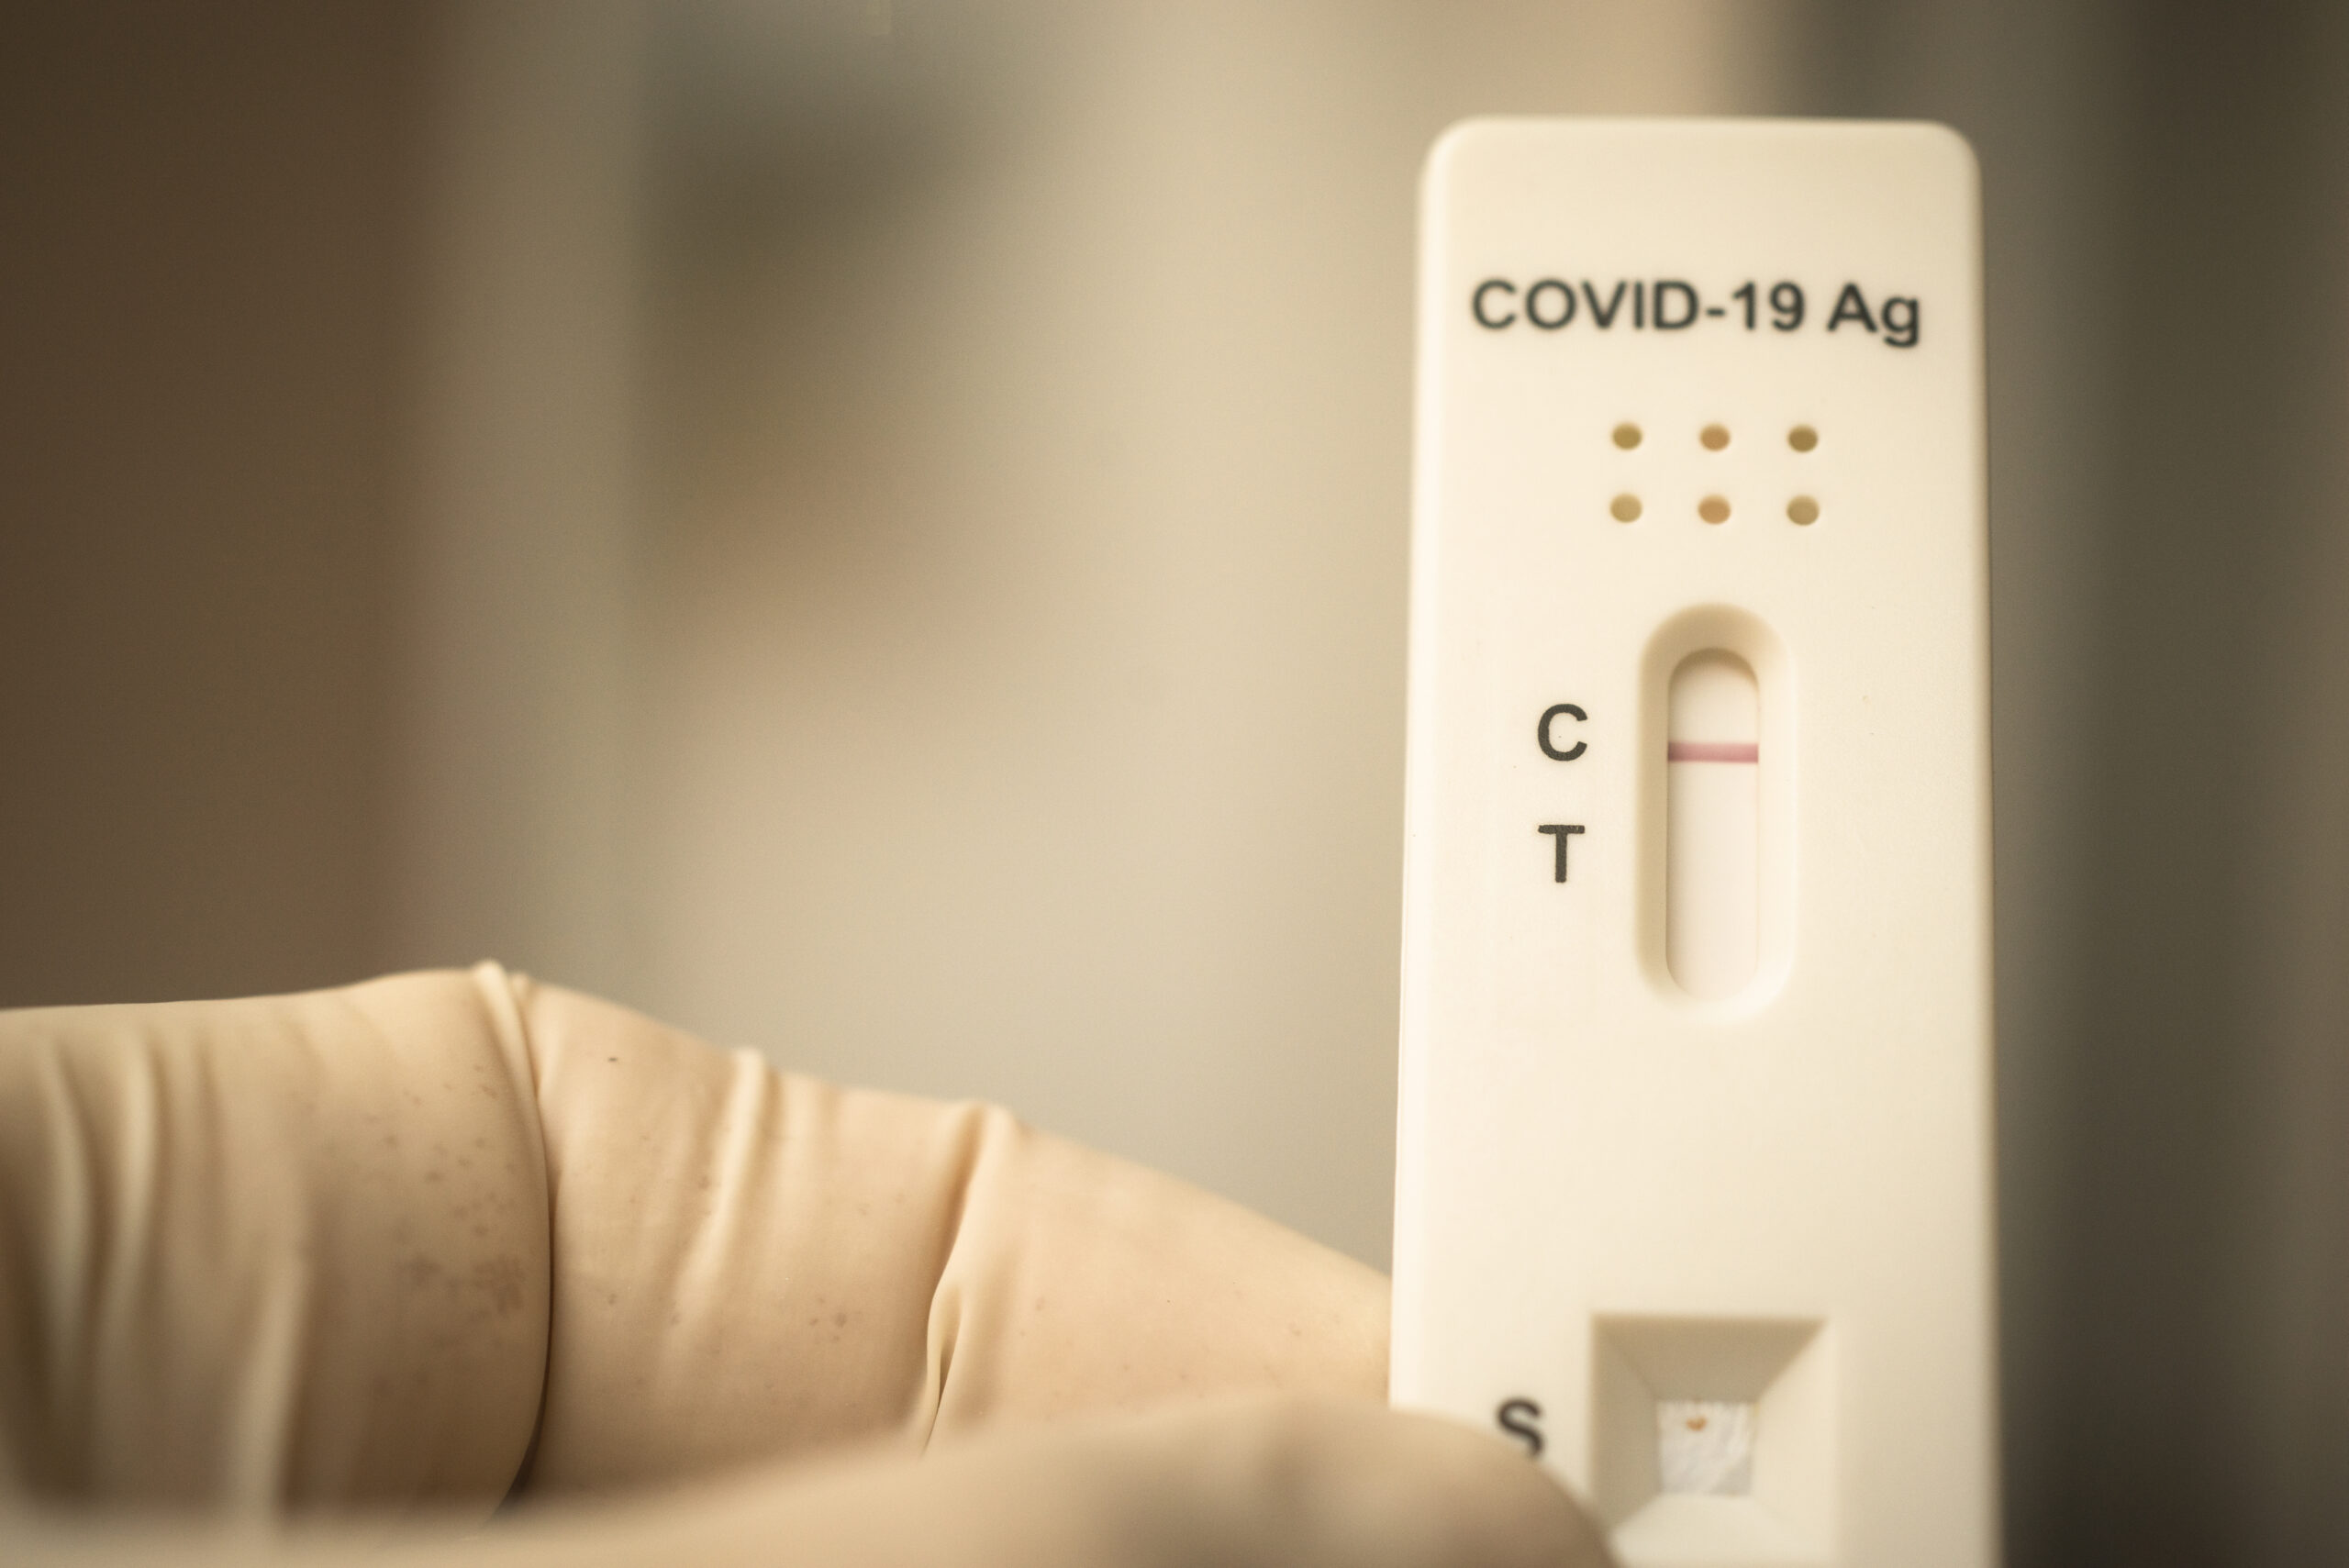 This week is the last chance to order free at-home COVID tests